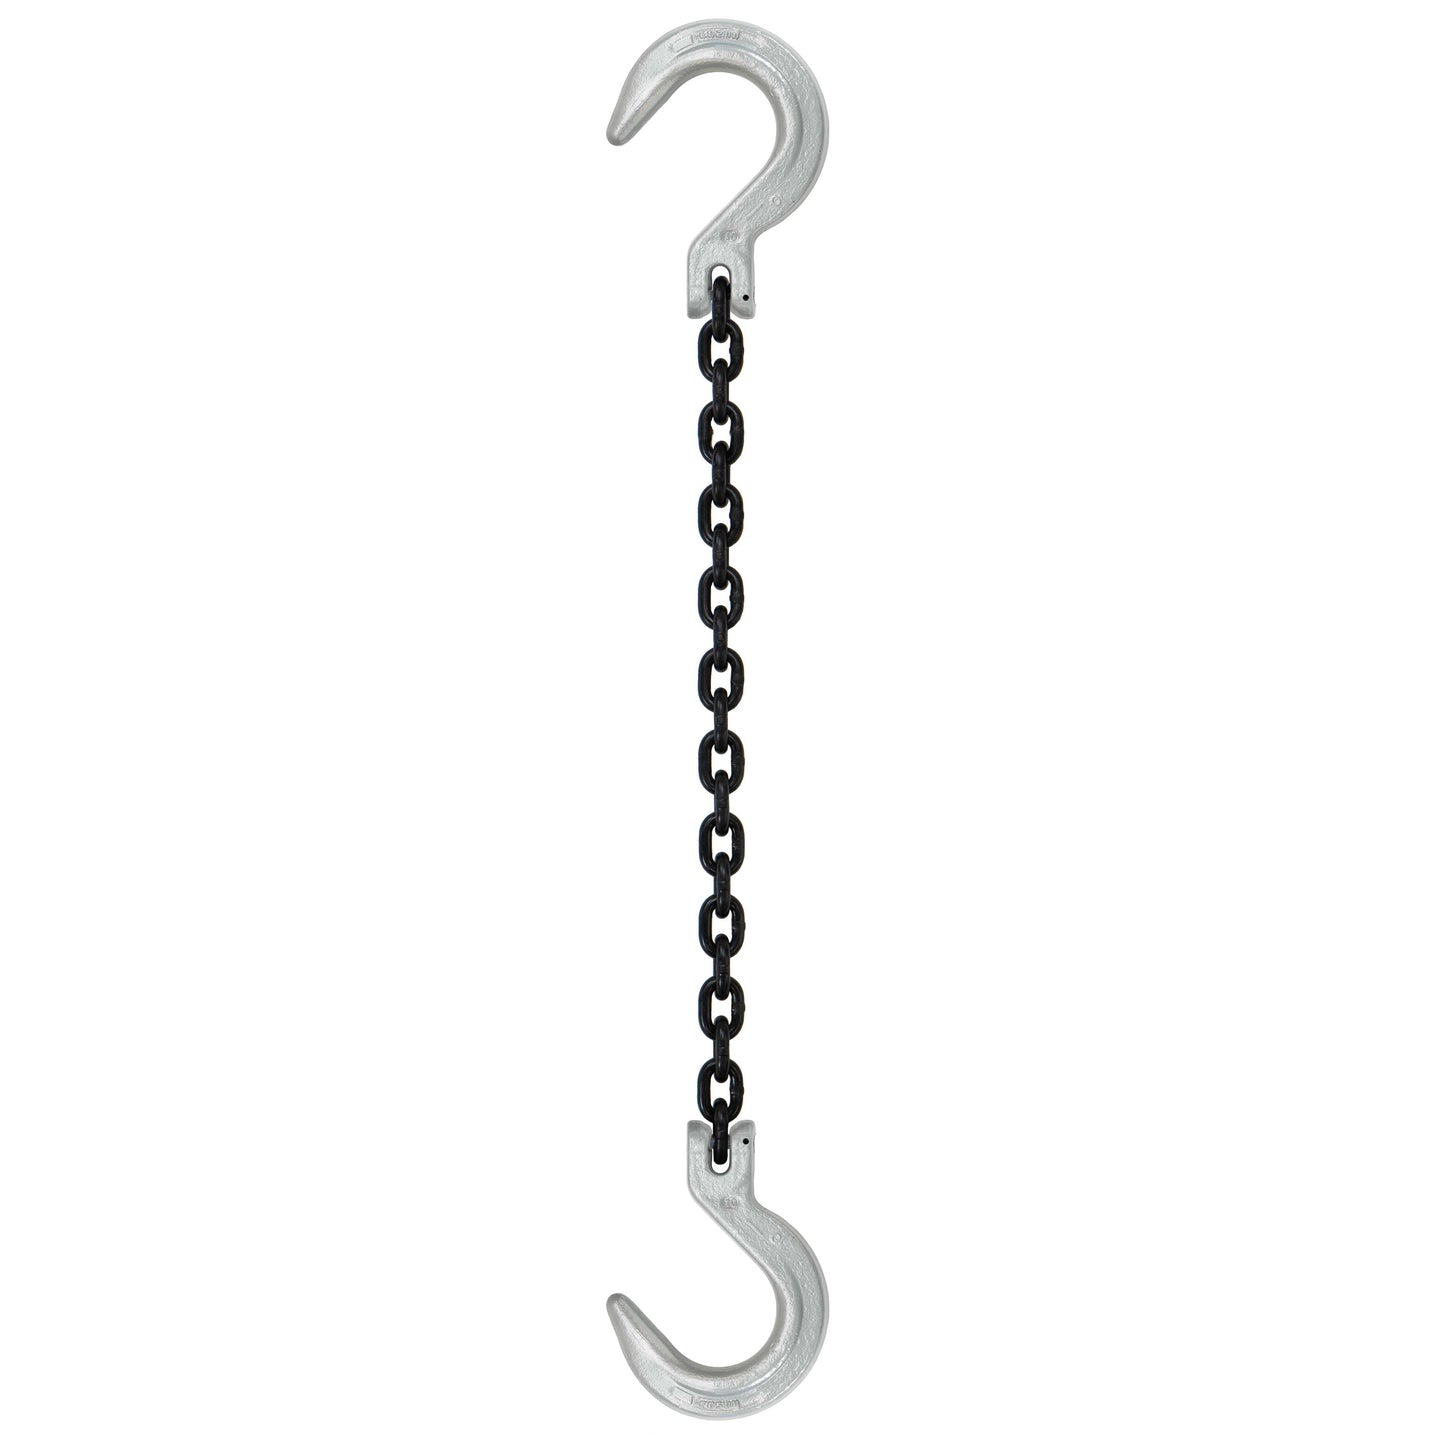 932 inch x 6 foot Domestic Single Leg Chain Sling w Crosby Foundry & Foundry Hooks Grade 100 image 1 of 2